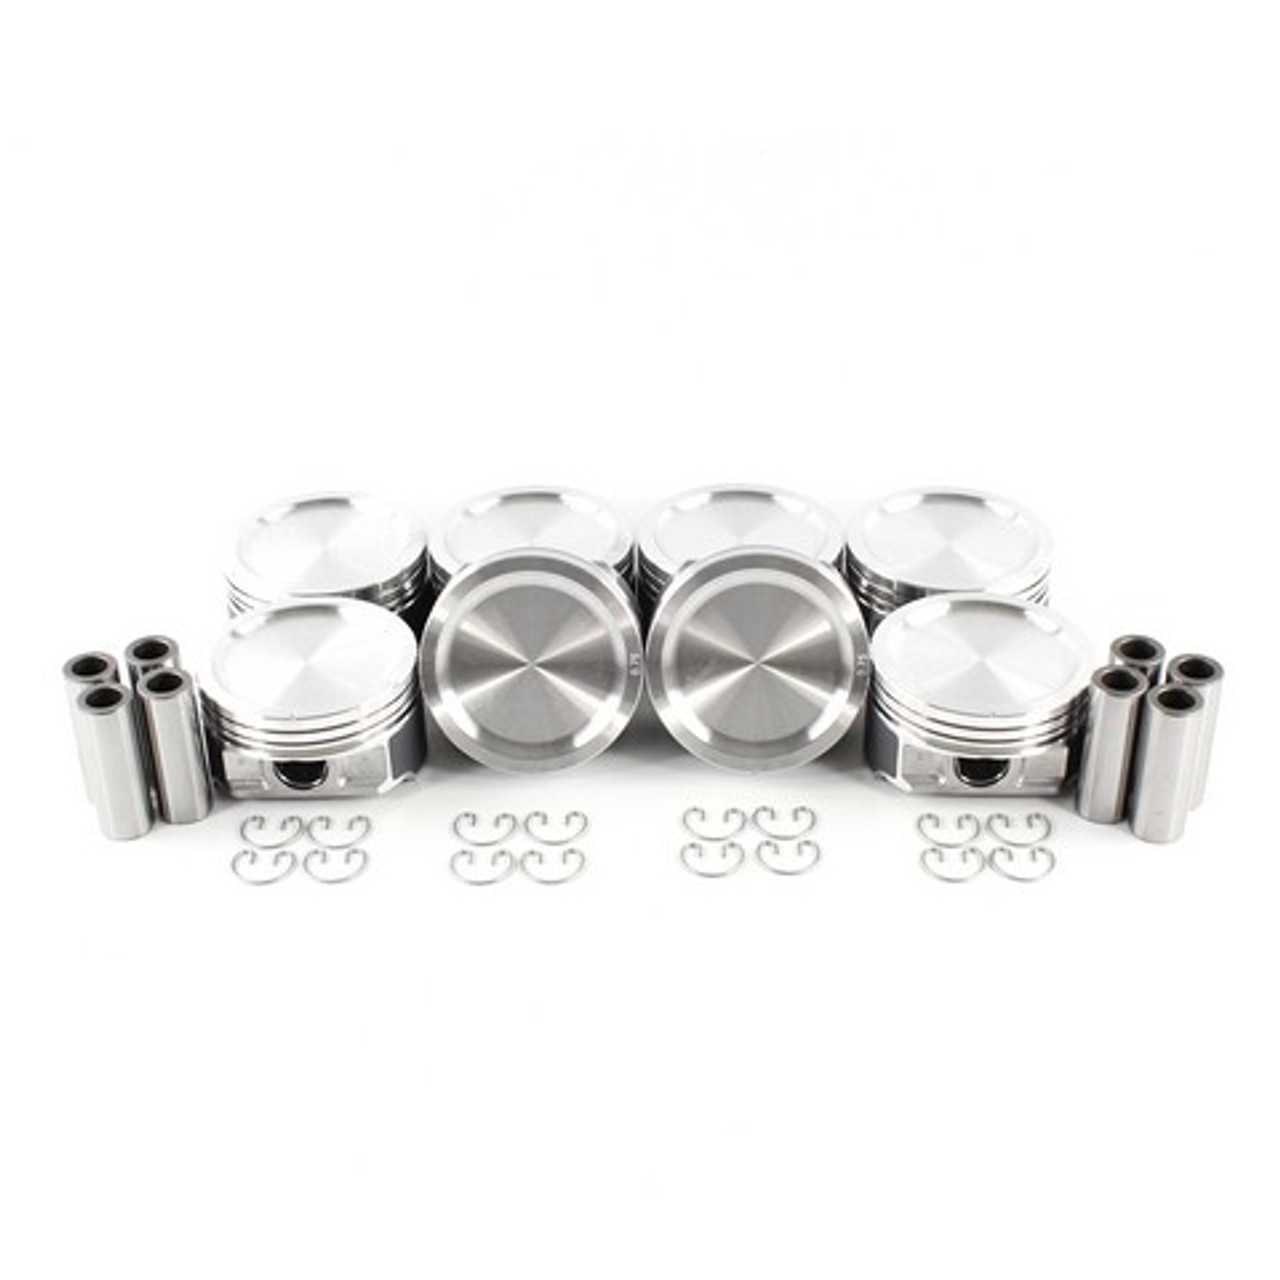 Piston Set 5.4L 2004 Ford Expedition - P4170.108